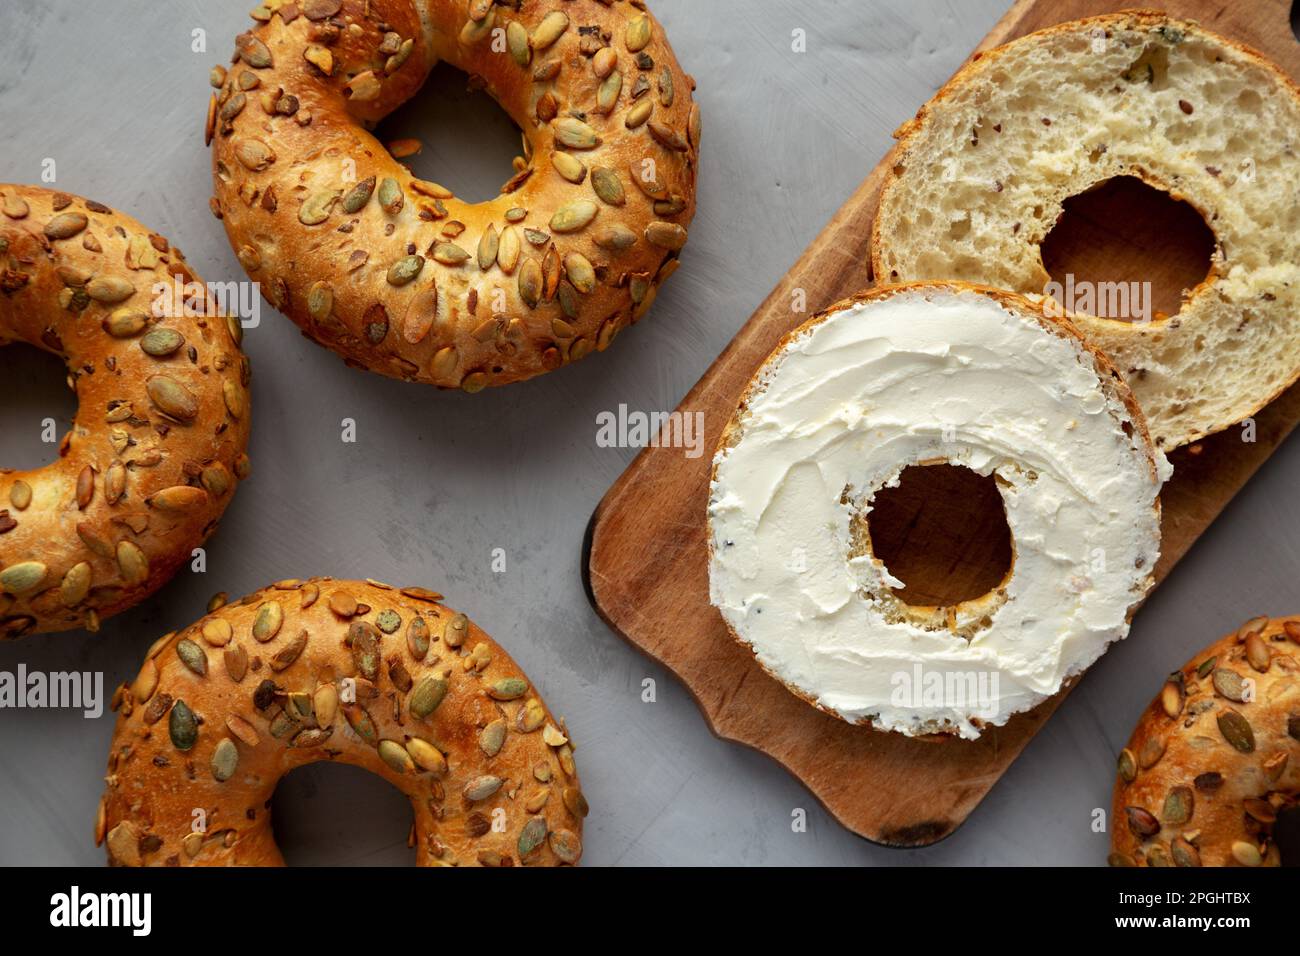 Homemade Whole Grain Bagel with Cream Cheese on a rustic wooden board, top view. Stock Photo